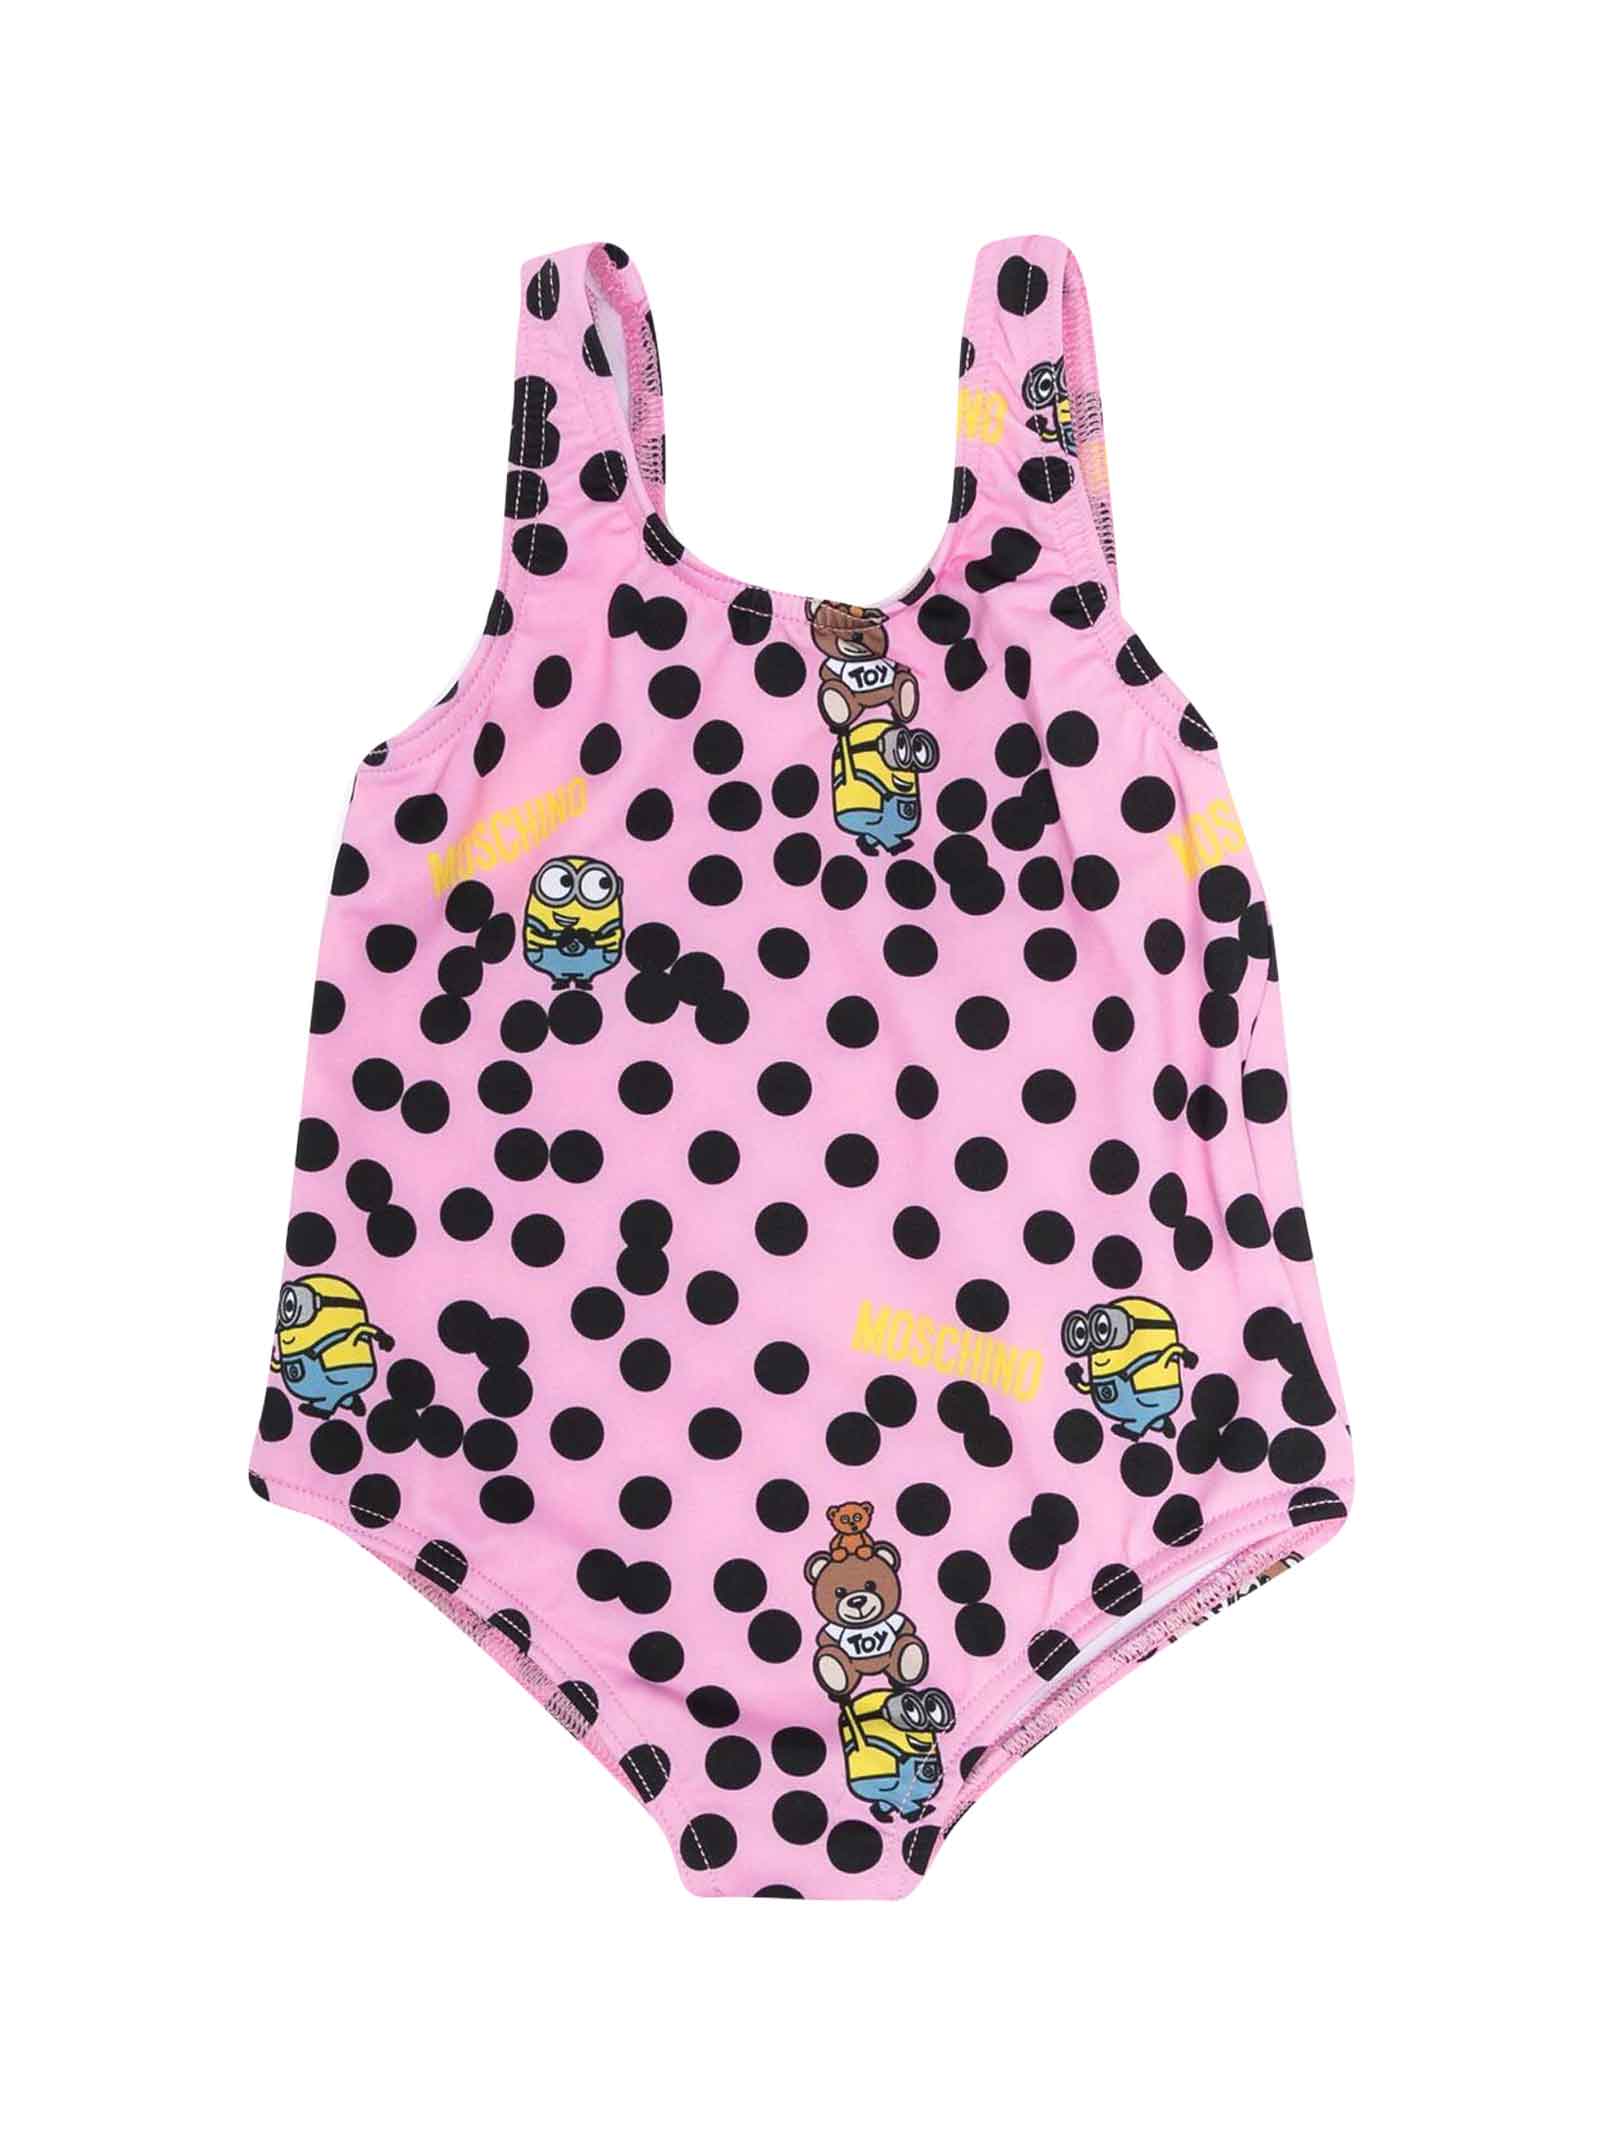 Moschino Pink Baby Girl Swimsuit, With Teddy Bear And Minions Motif, All-over Print By.